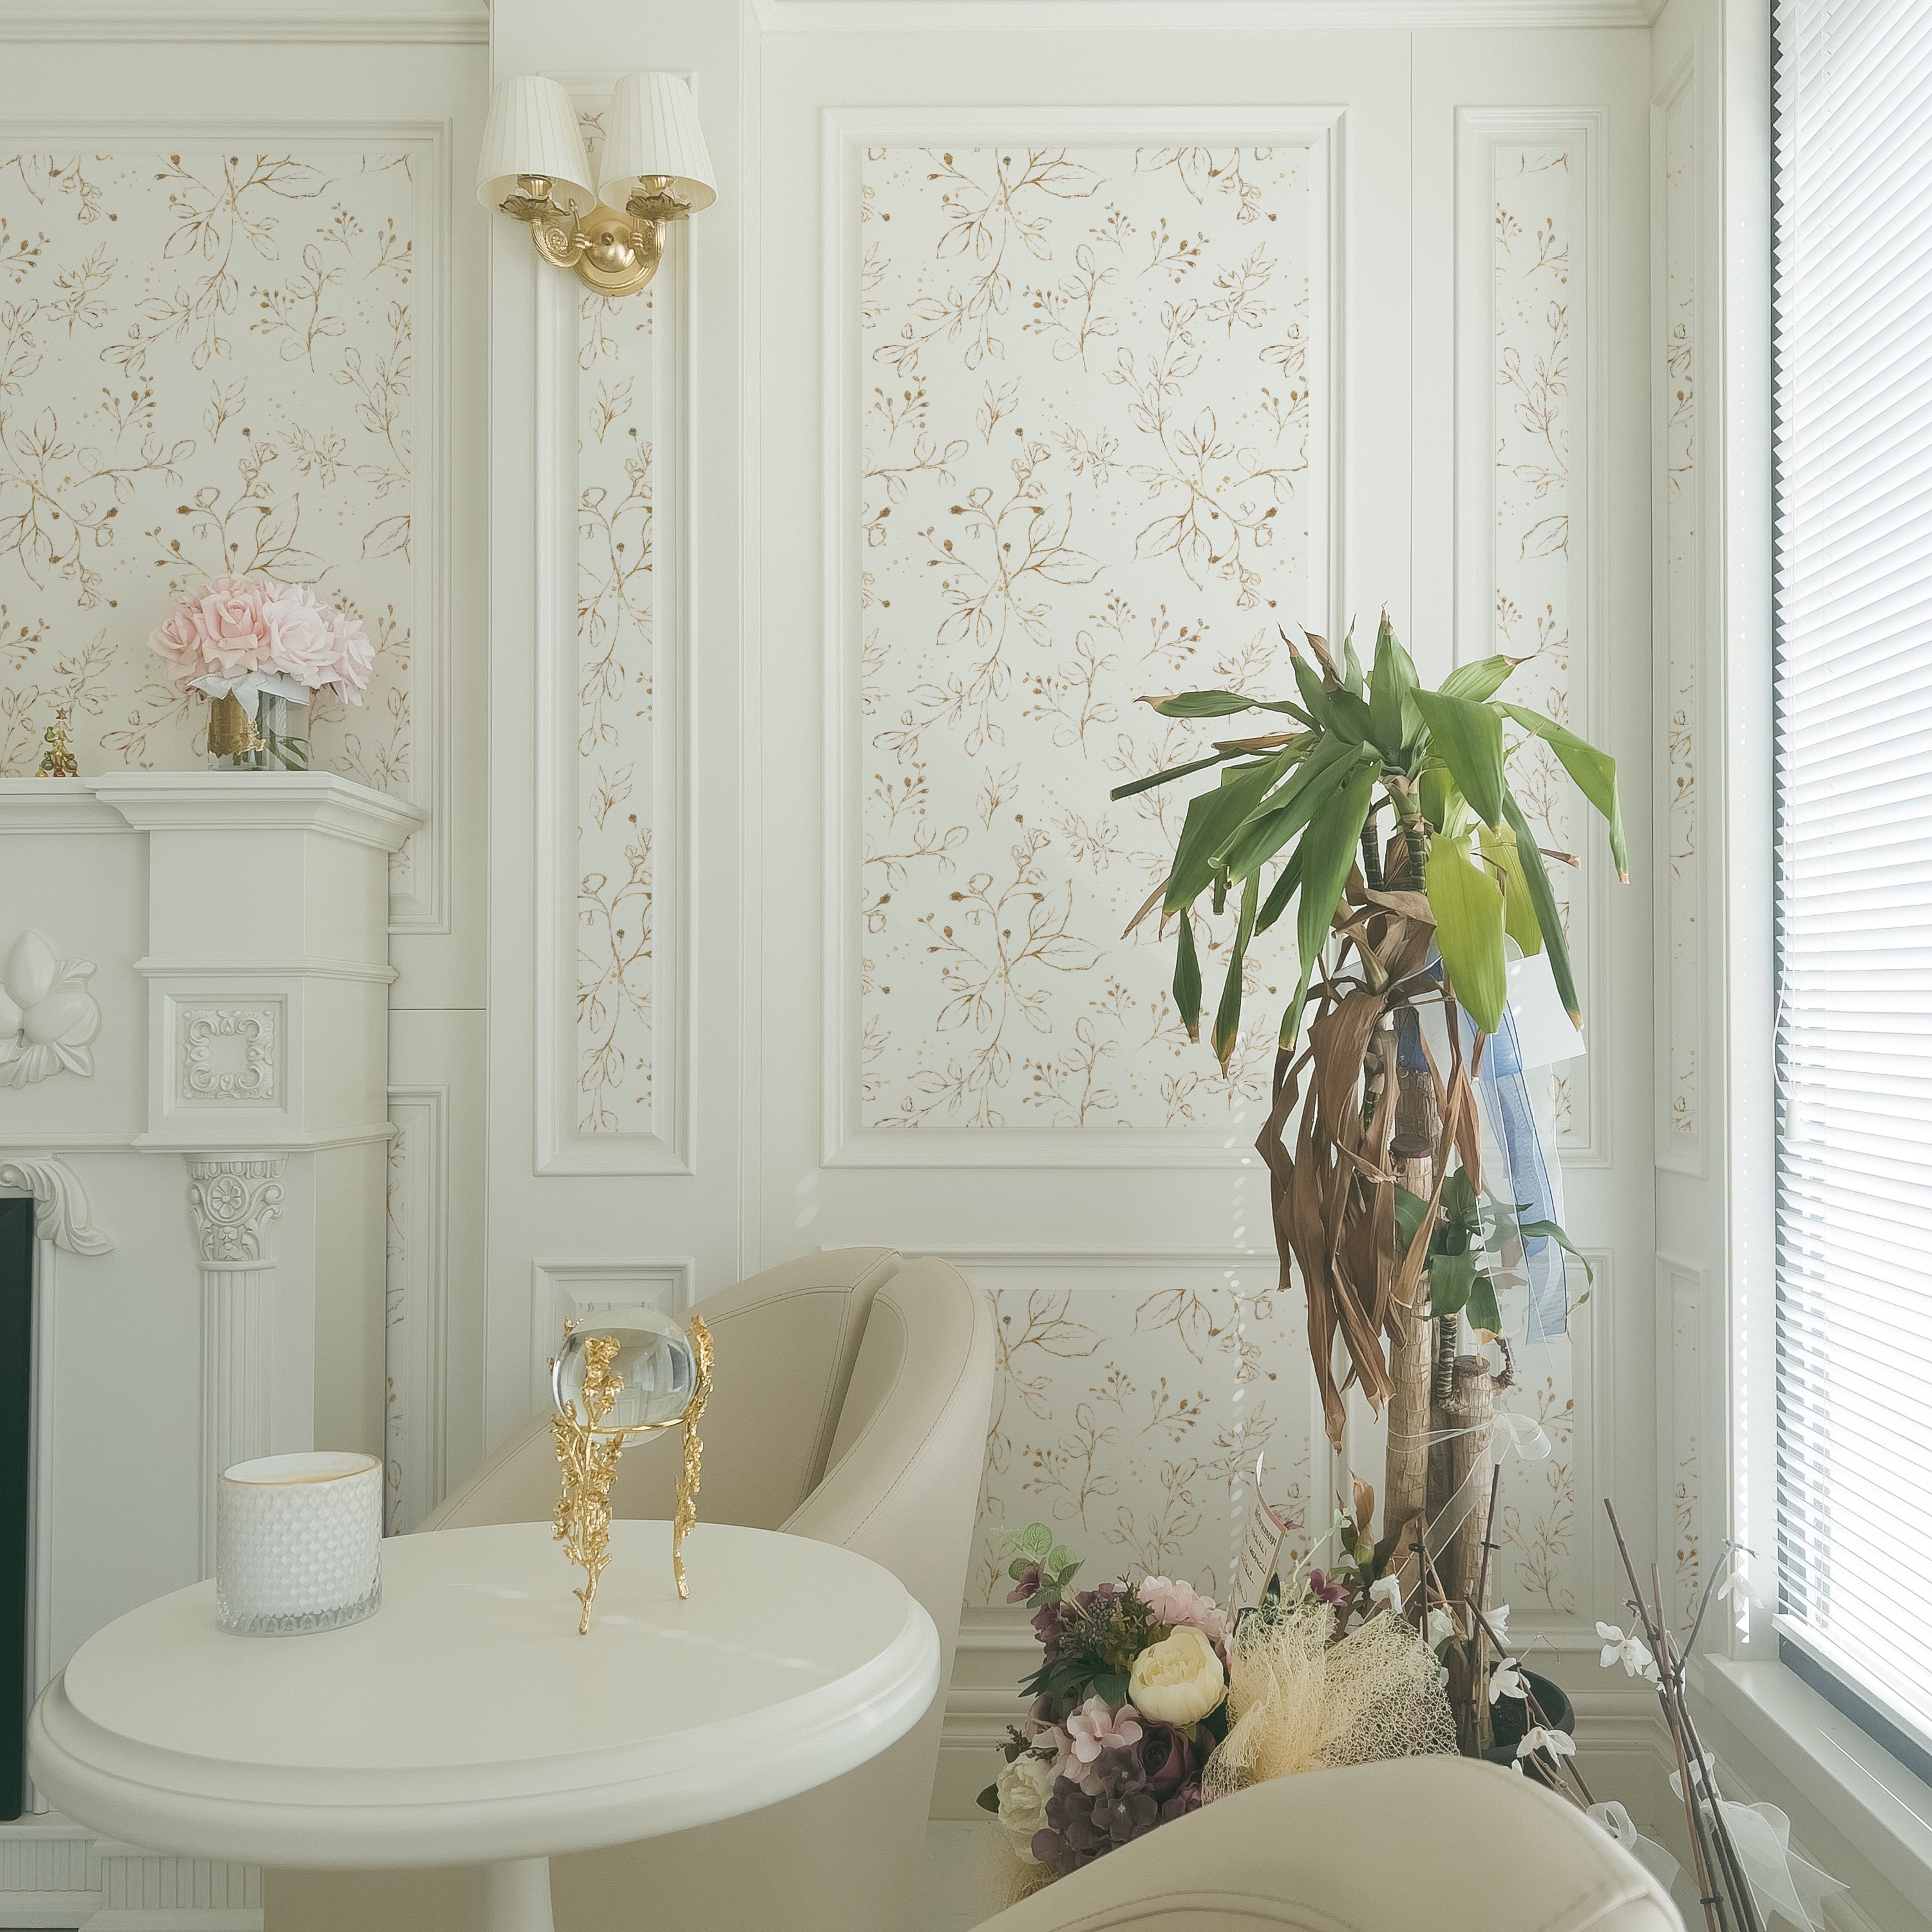 A tranquil corner with a white chair and table against Gold Leaves Wallpaper, creating a luxurious and peaceful reading nook accentuated by warm golden lighting and delicate pink flowers.